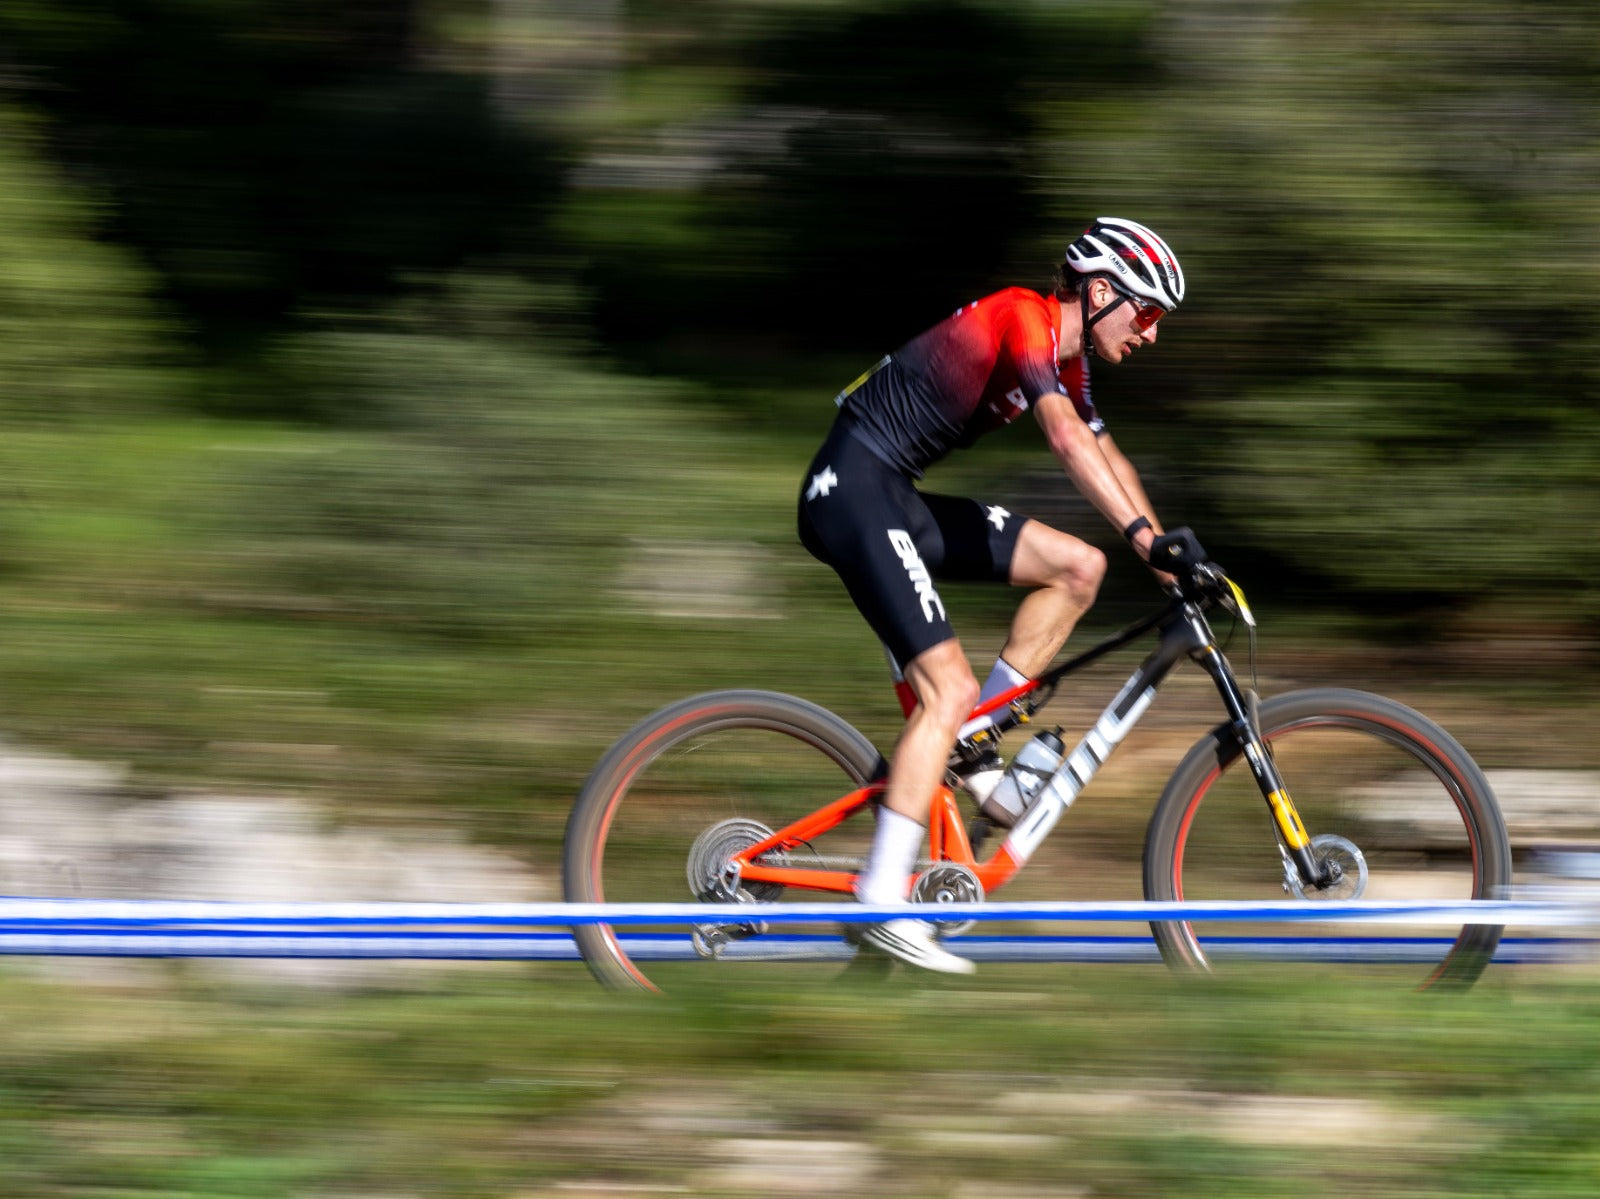 Swiss Bike Cup in Monte Tamaro: a special and important race for Juri Zanotti